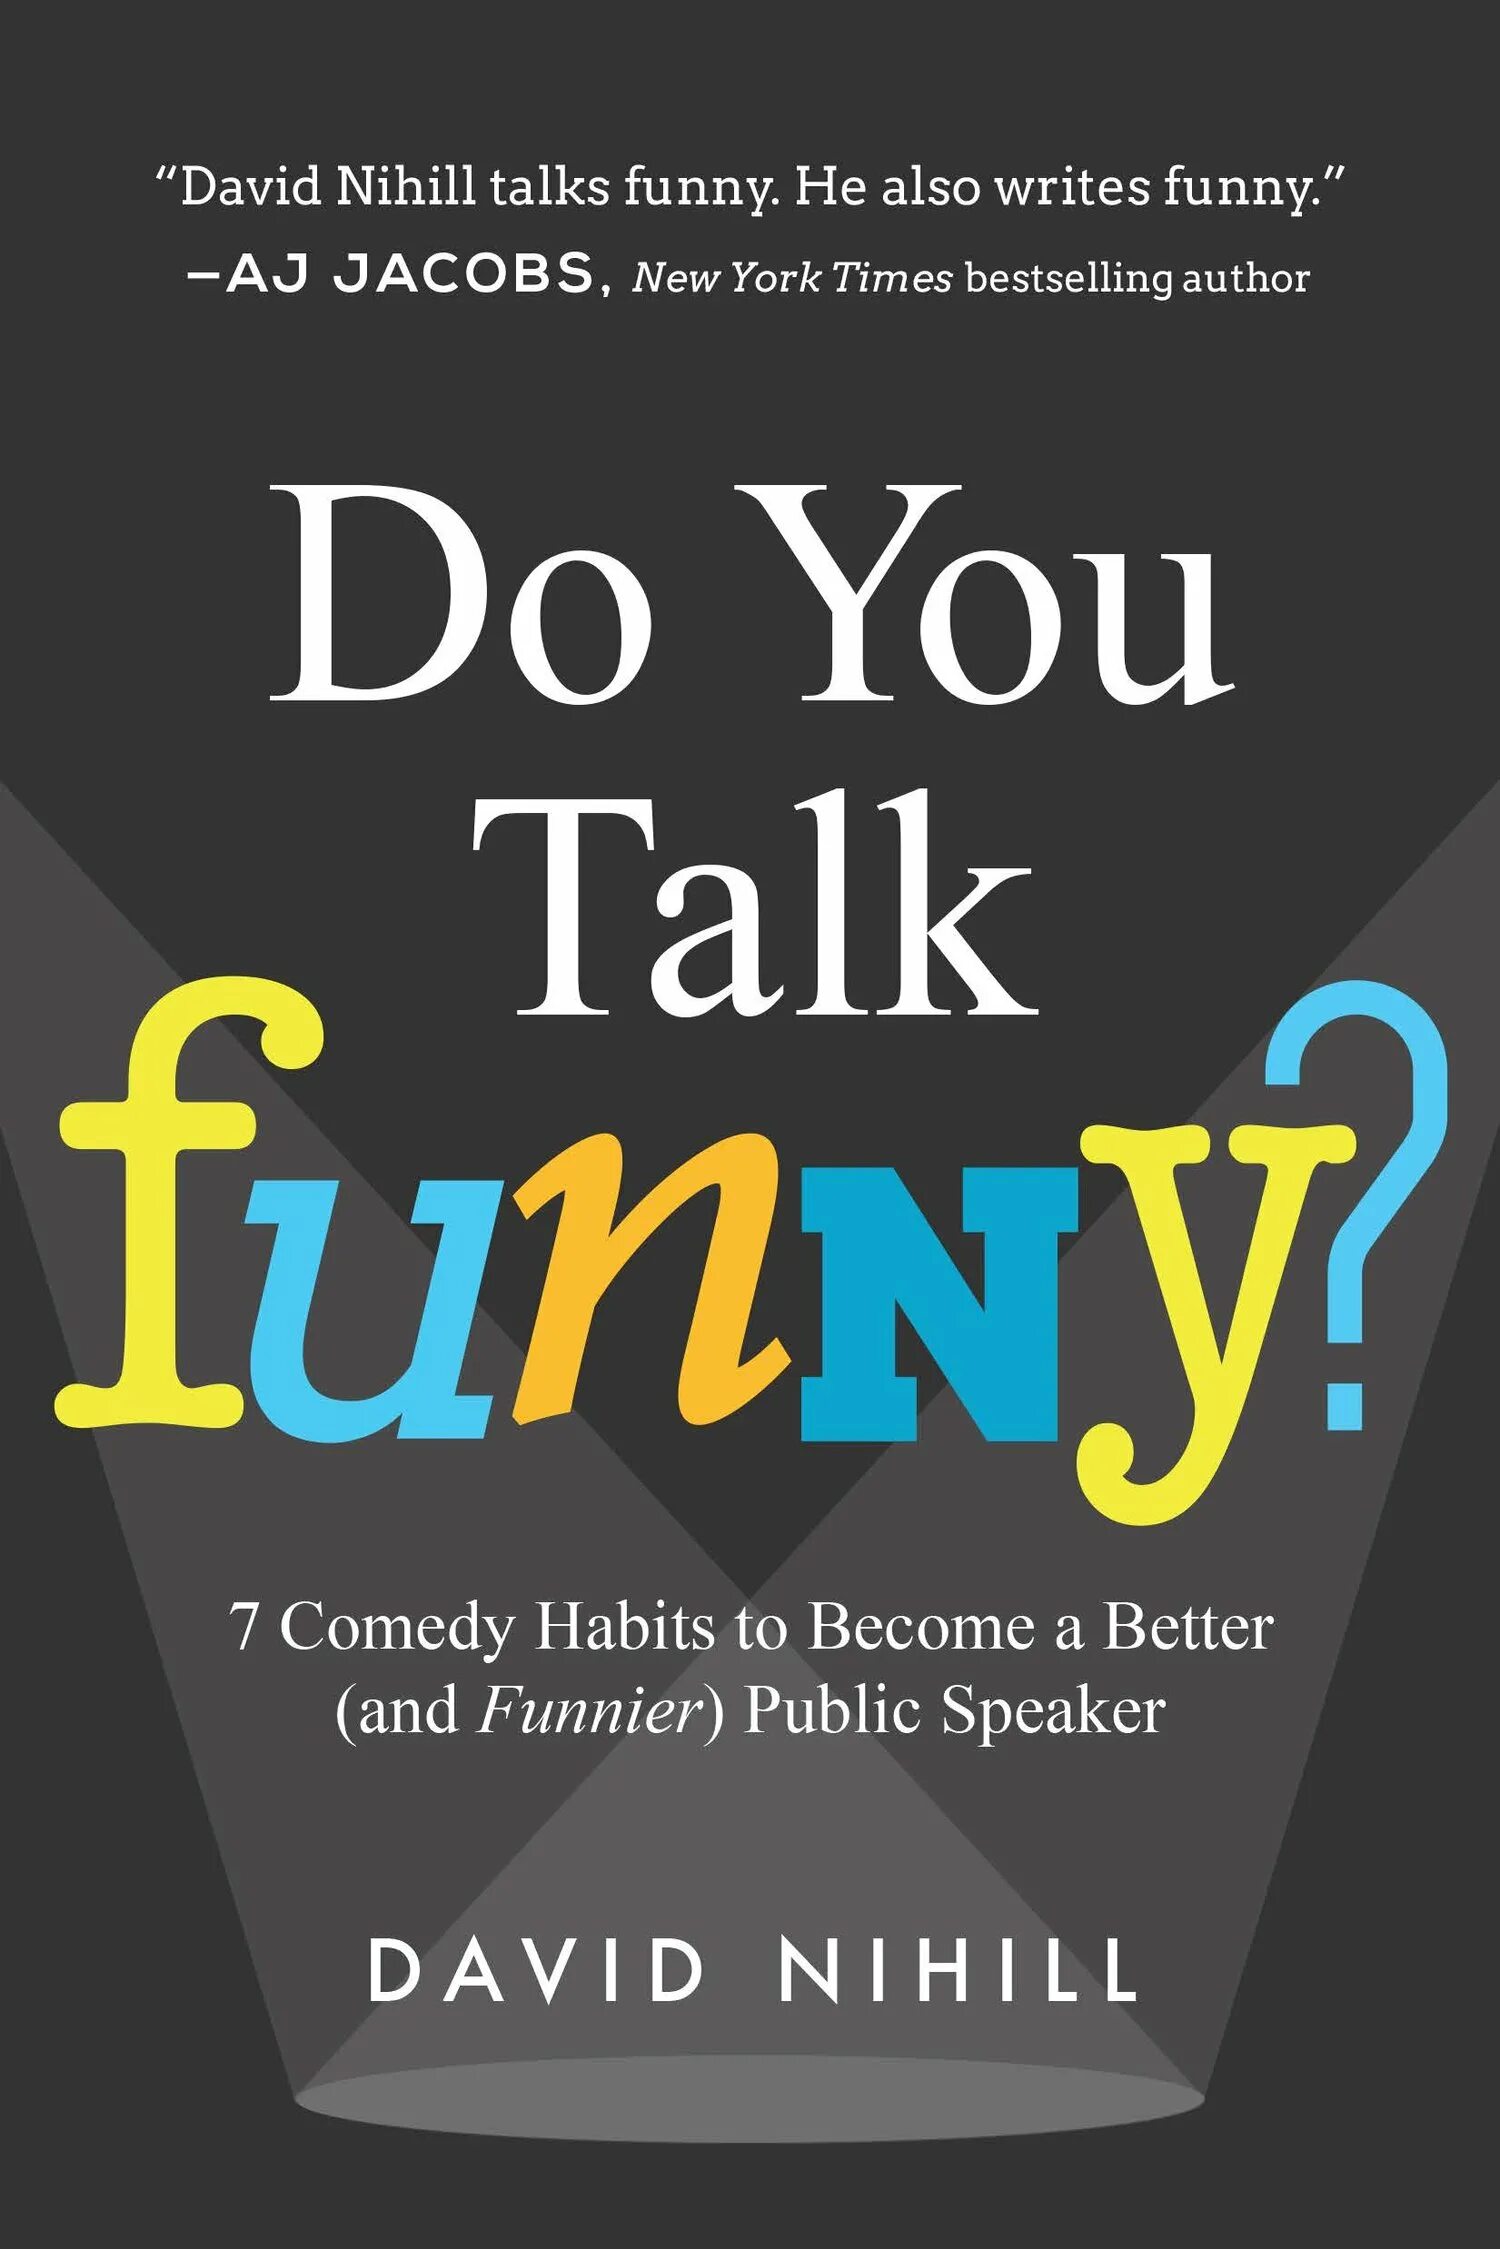 You talk. David funny. Do you talk funny 7 comedy Habits to become a better. Negotiation funny. Fun talk